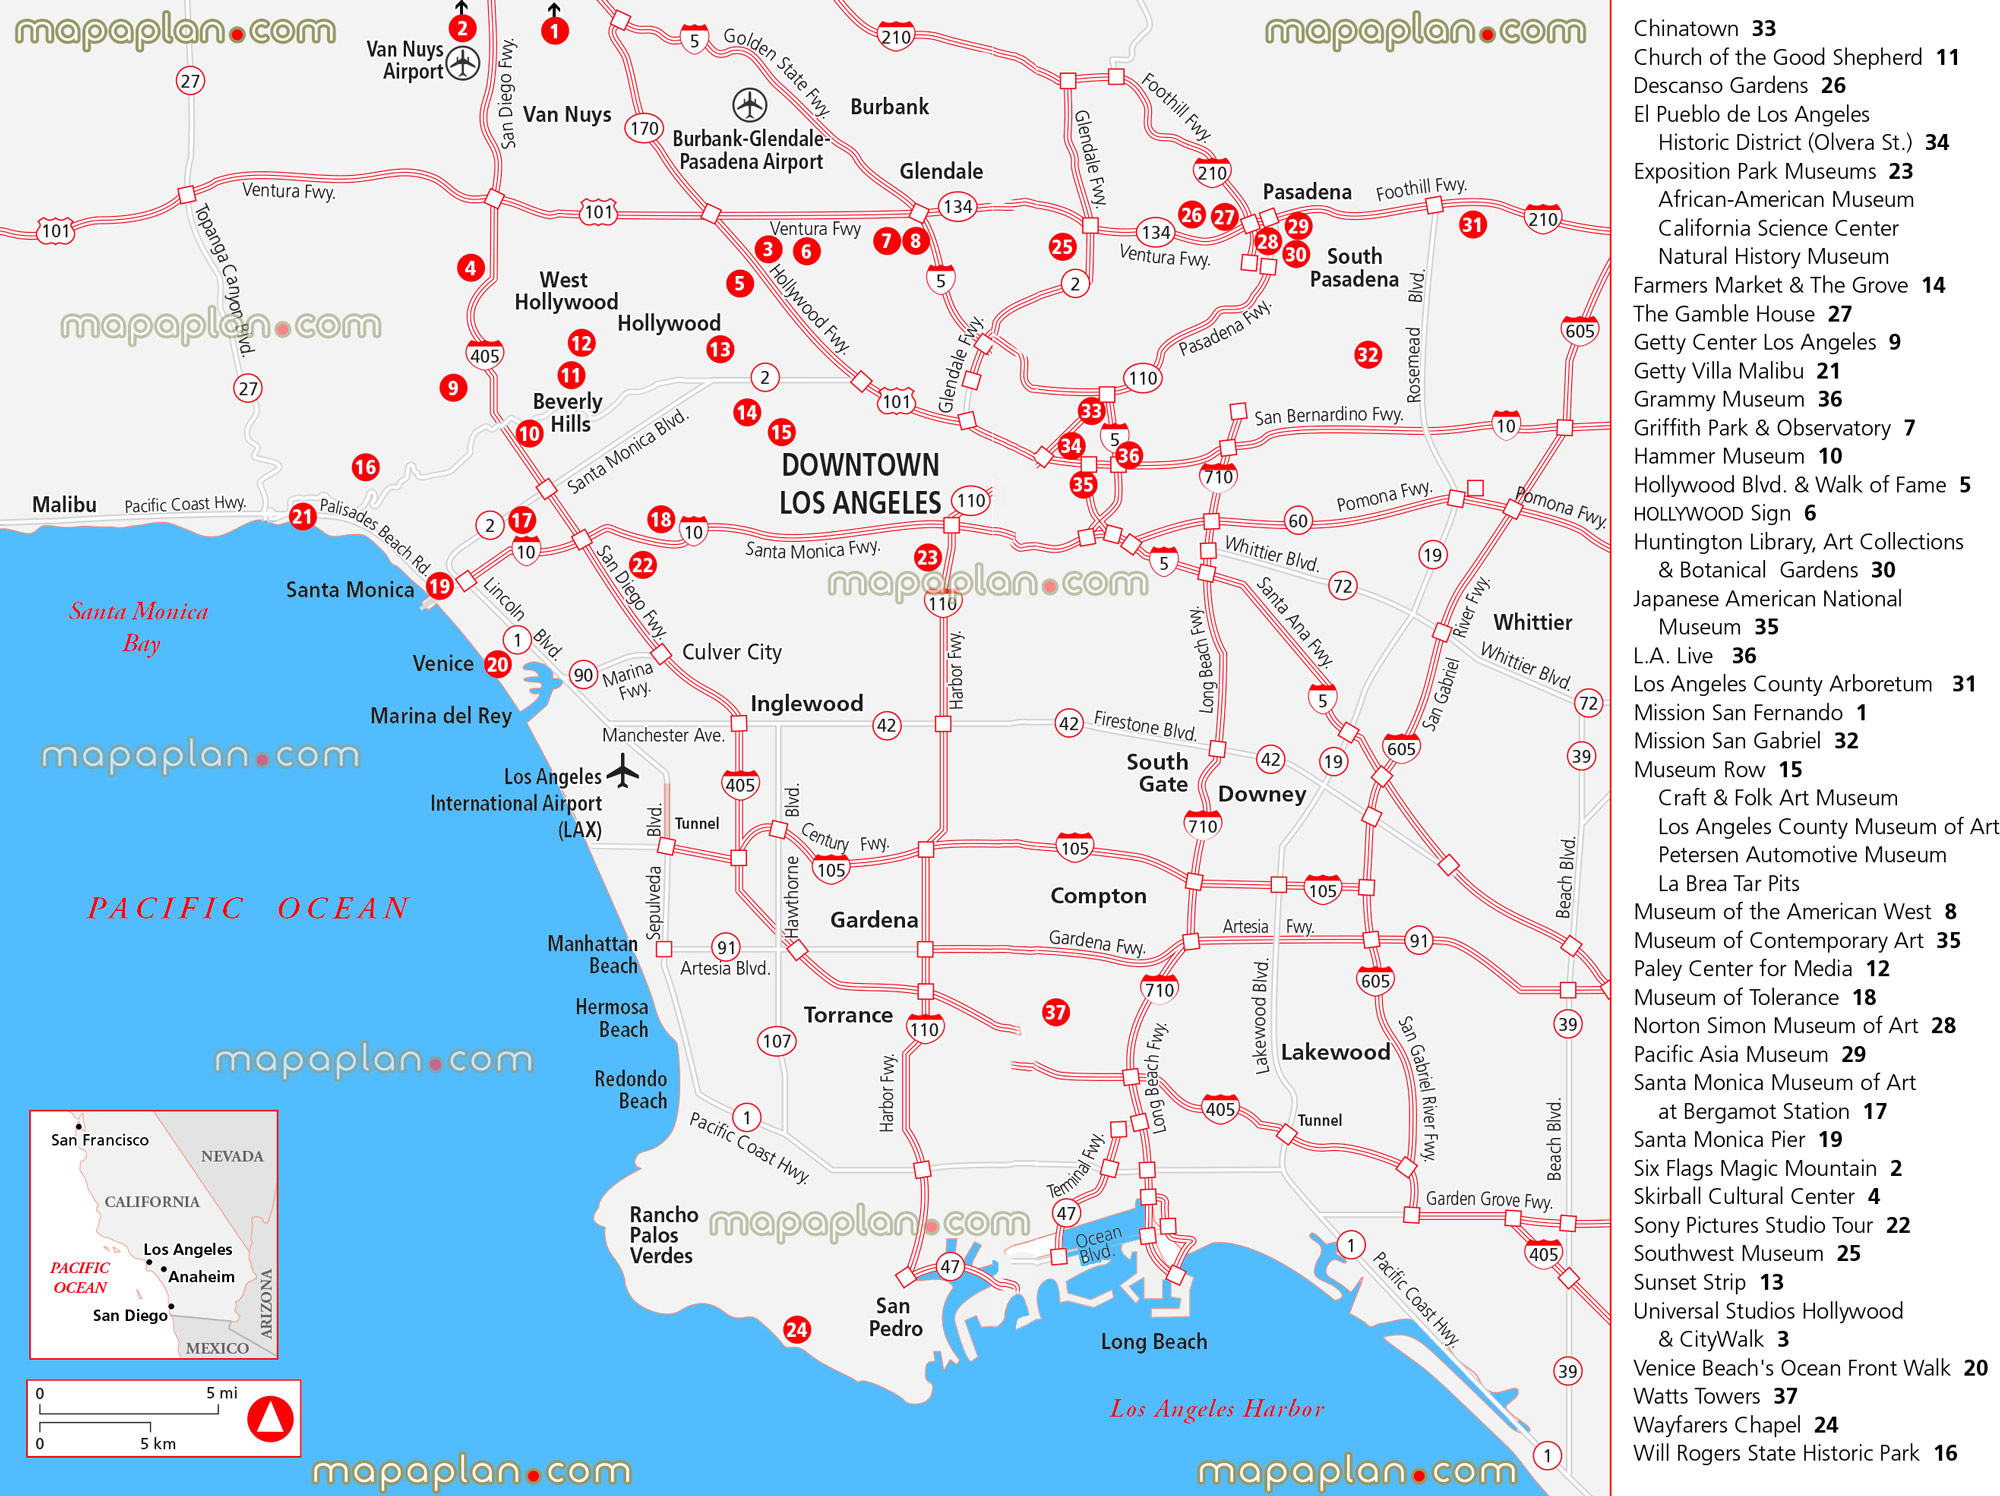 la california location major landmarks most popular beach cities guide famous historical old sites museums great historic spots must do places farmers market grove hollywood sign boulevard sunset strip citywalk venice beach ocean front walks Los Angeles top tourist attractions map